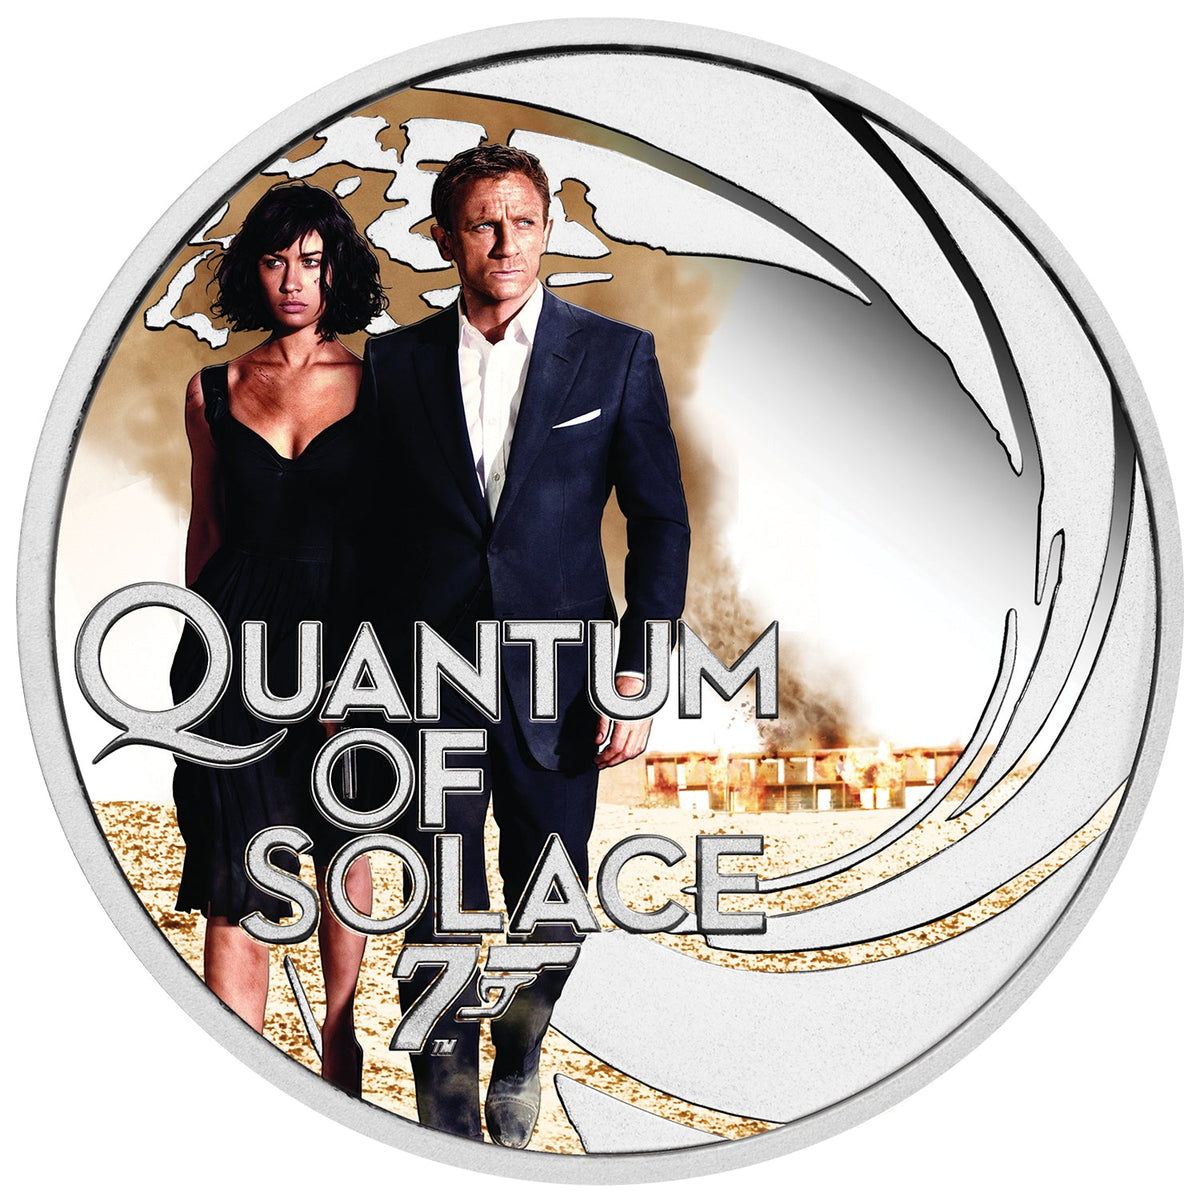 Quantum Of Solace 1/2 oz Silver Proof Coin - By The Perth Mint COIN PERTH MINT 